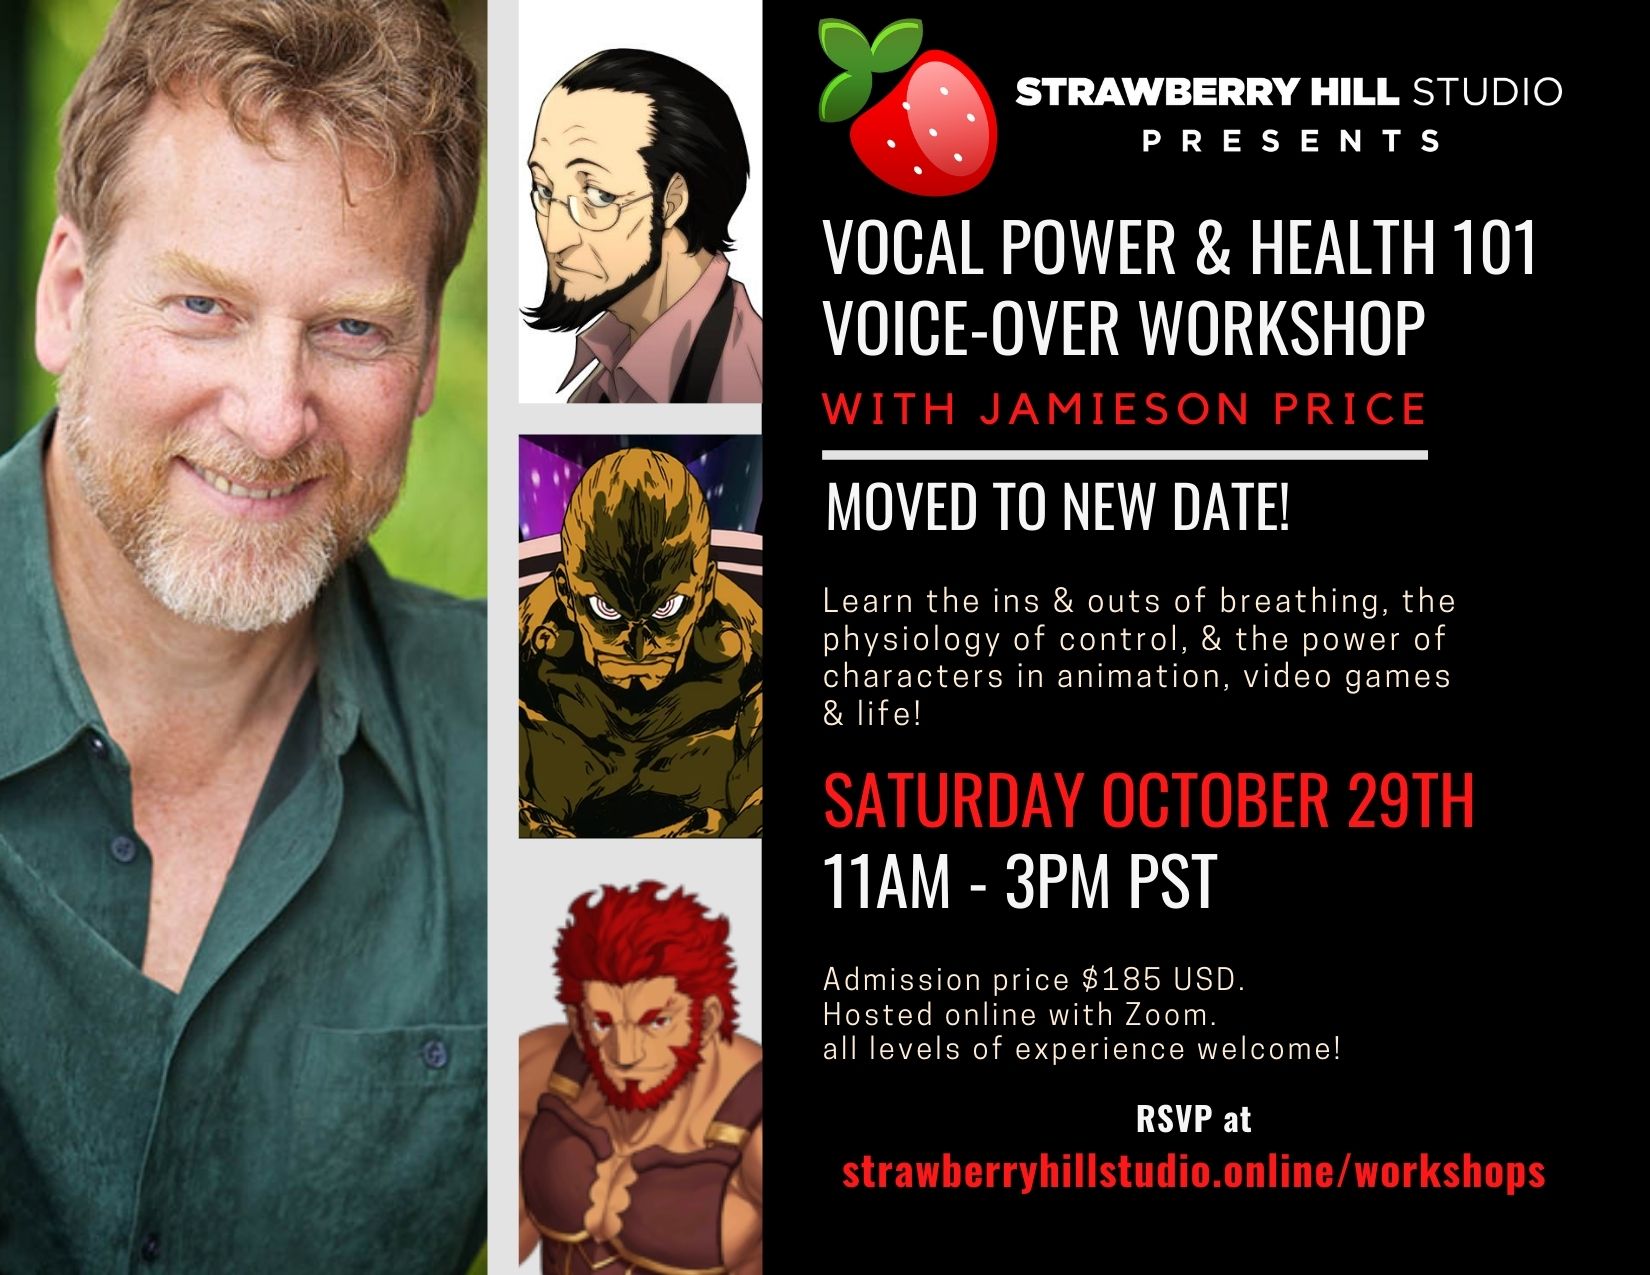 NEW DATE - Vocal Power & Health 101 Voice-Over Workshop w/ Jamieson Price